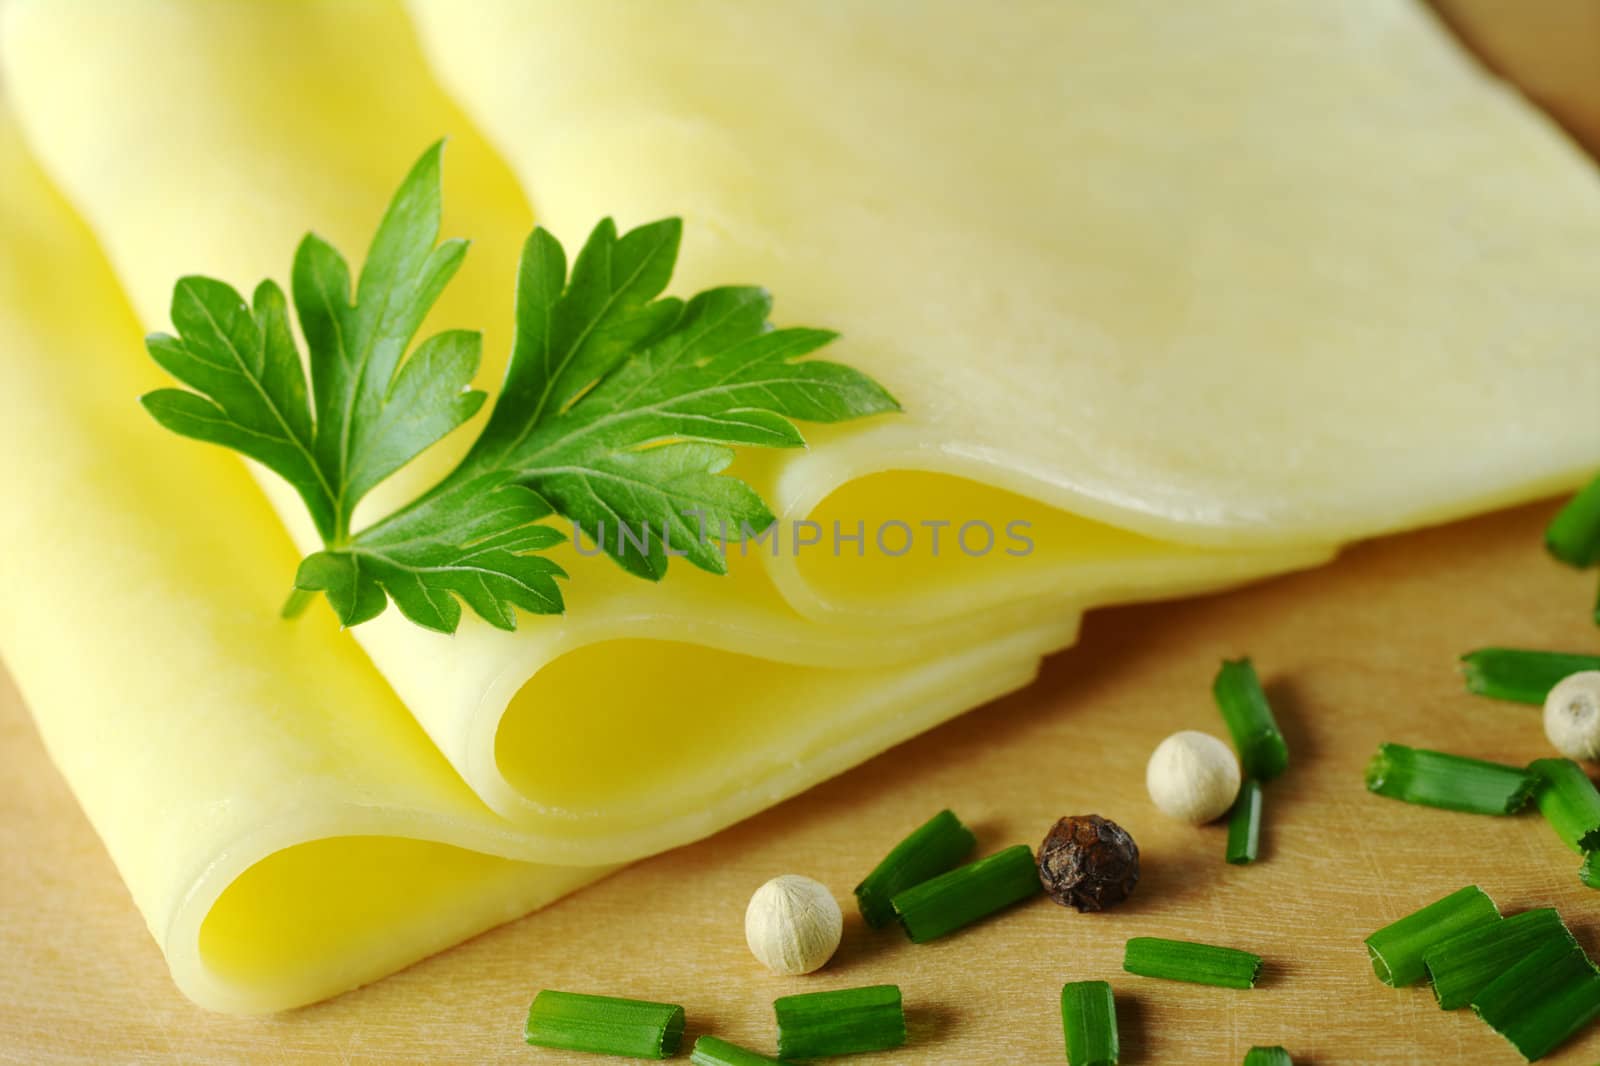 Cheese slices garnished with a parsley leaf and some shallot and pepper corns in the foreground on wooden board (Very Shallow Depth of Field, Focus on the upper front part of the cheese and part of the parsley)